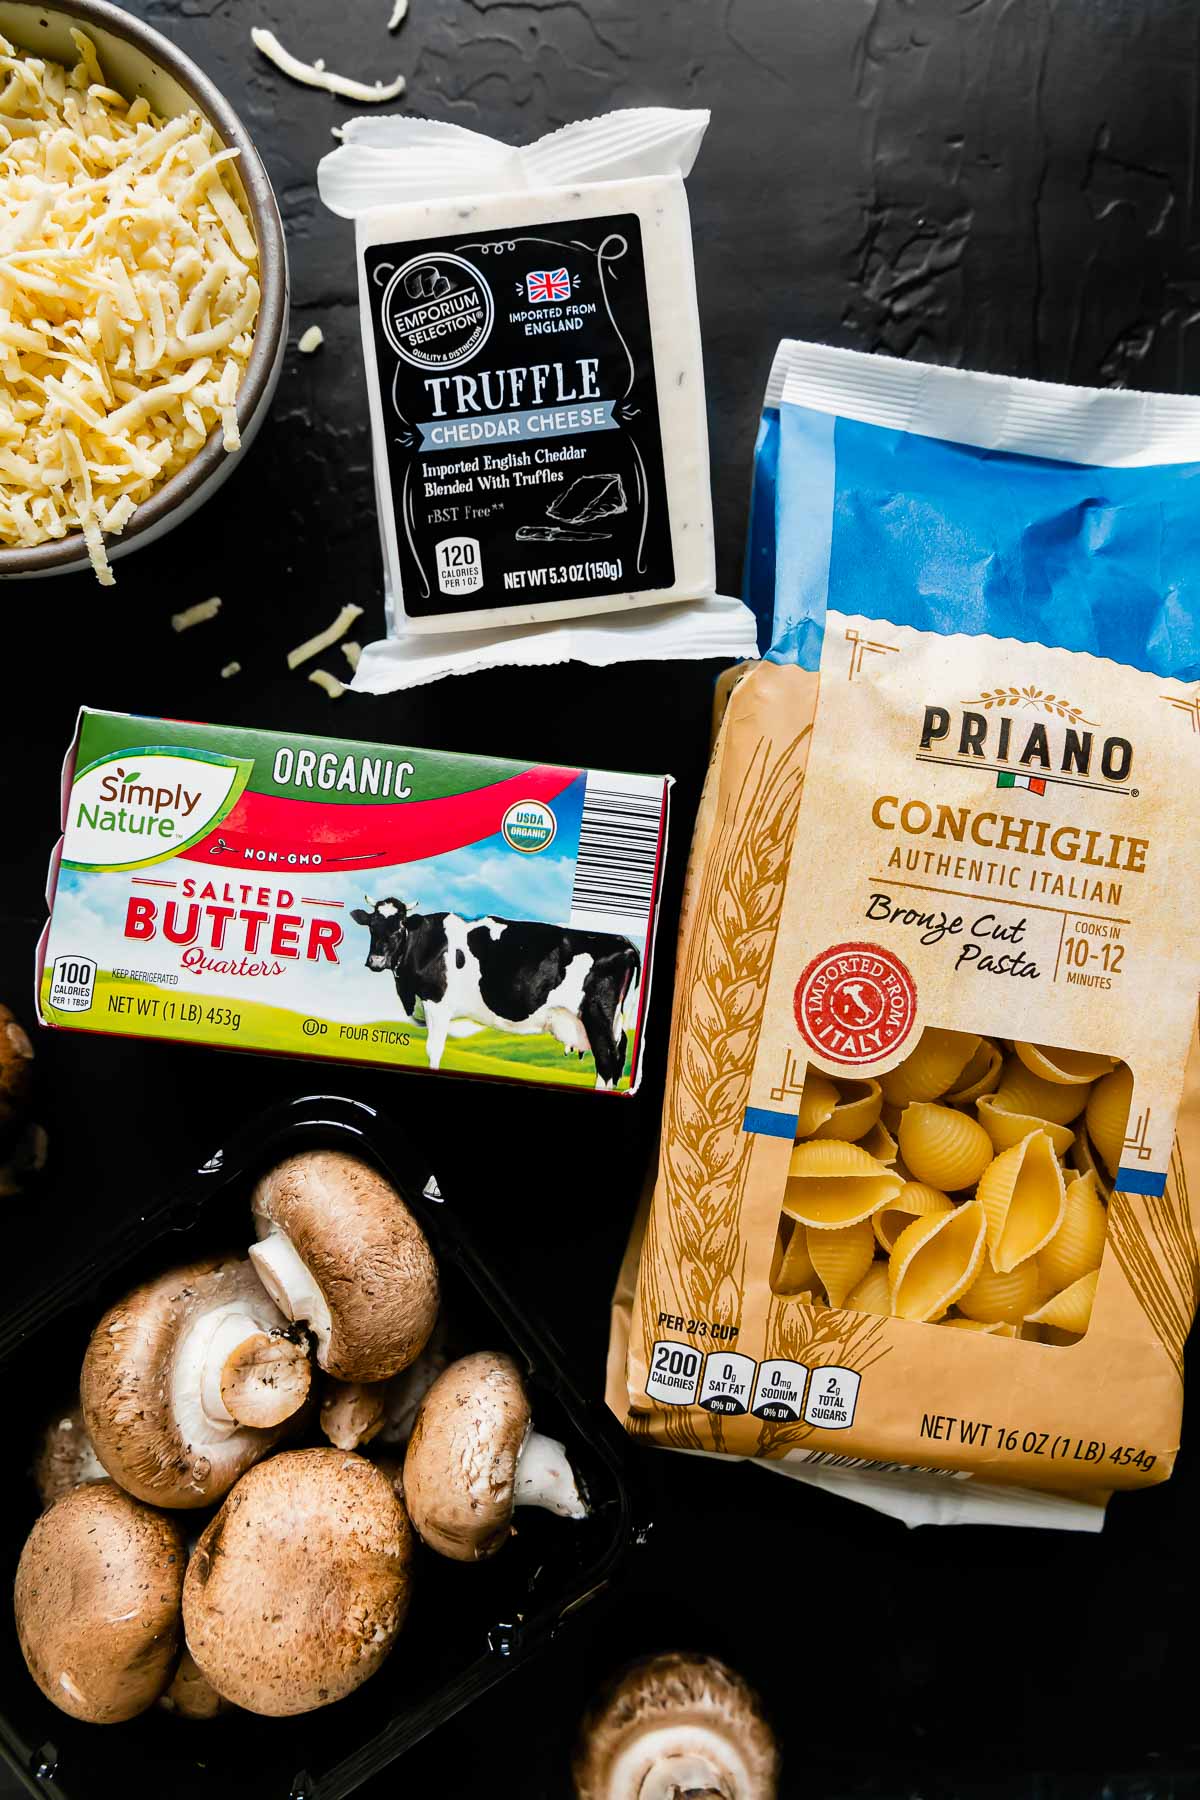 Truffle mac and cheese ingredients arranged on a black textured surface: Priano Authentic Italian Bronze Cut Conchiglie Pasta, Simply Nature Organic Salted Butter, cremini mushrooms, and Emporium Selection Premium English Truffle Cheddar Cheese.